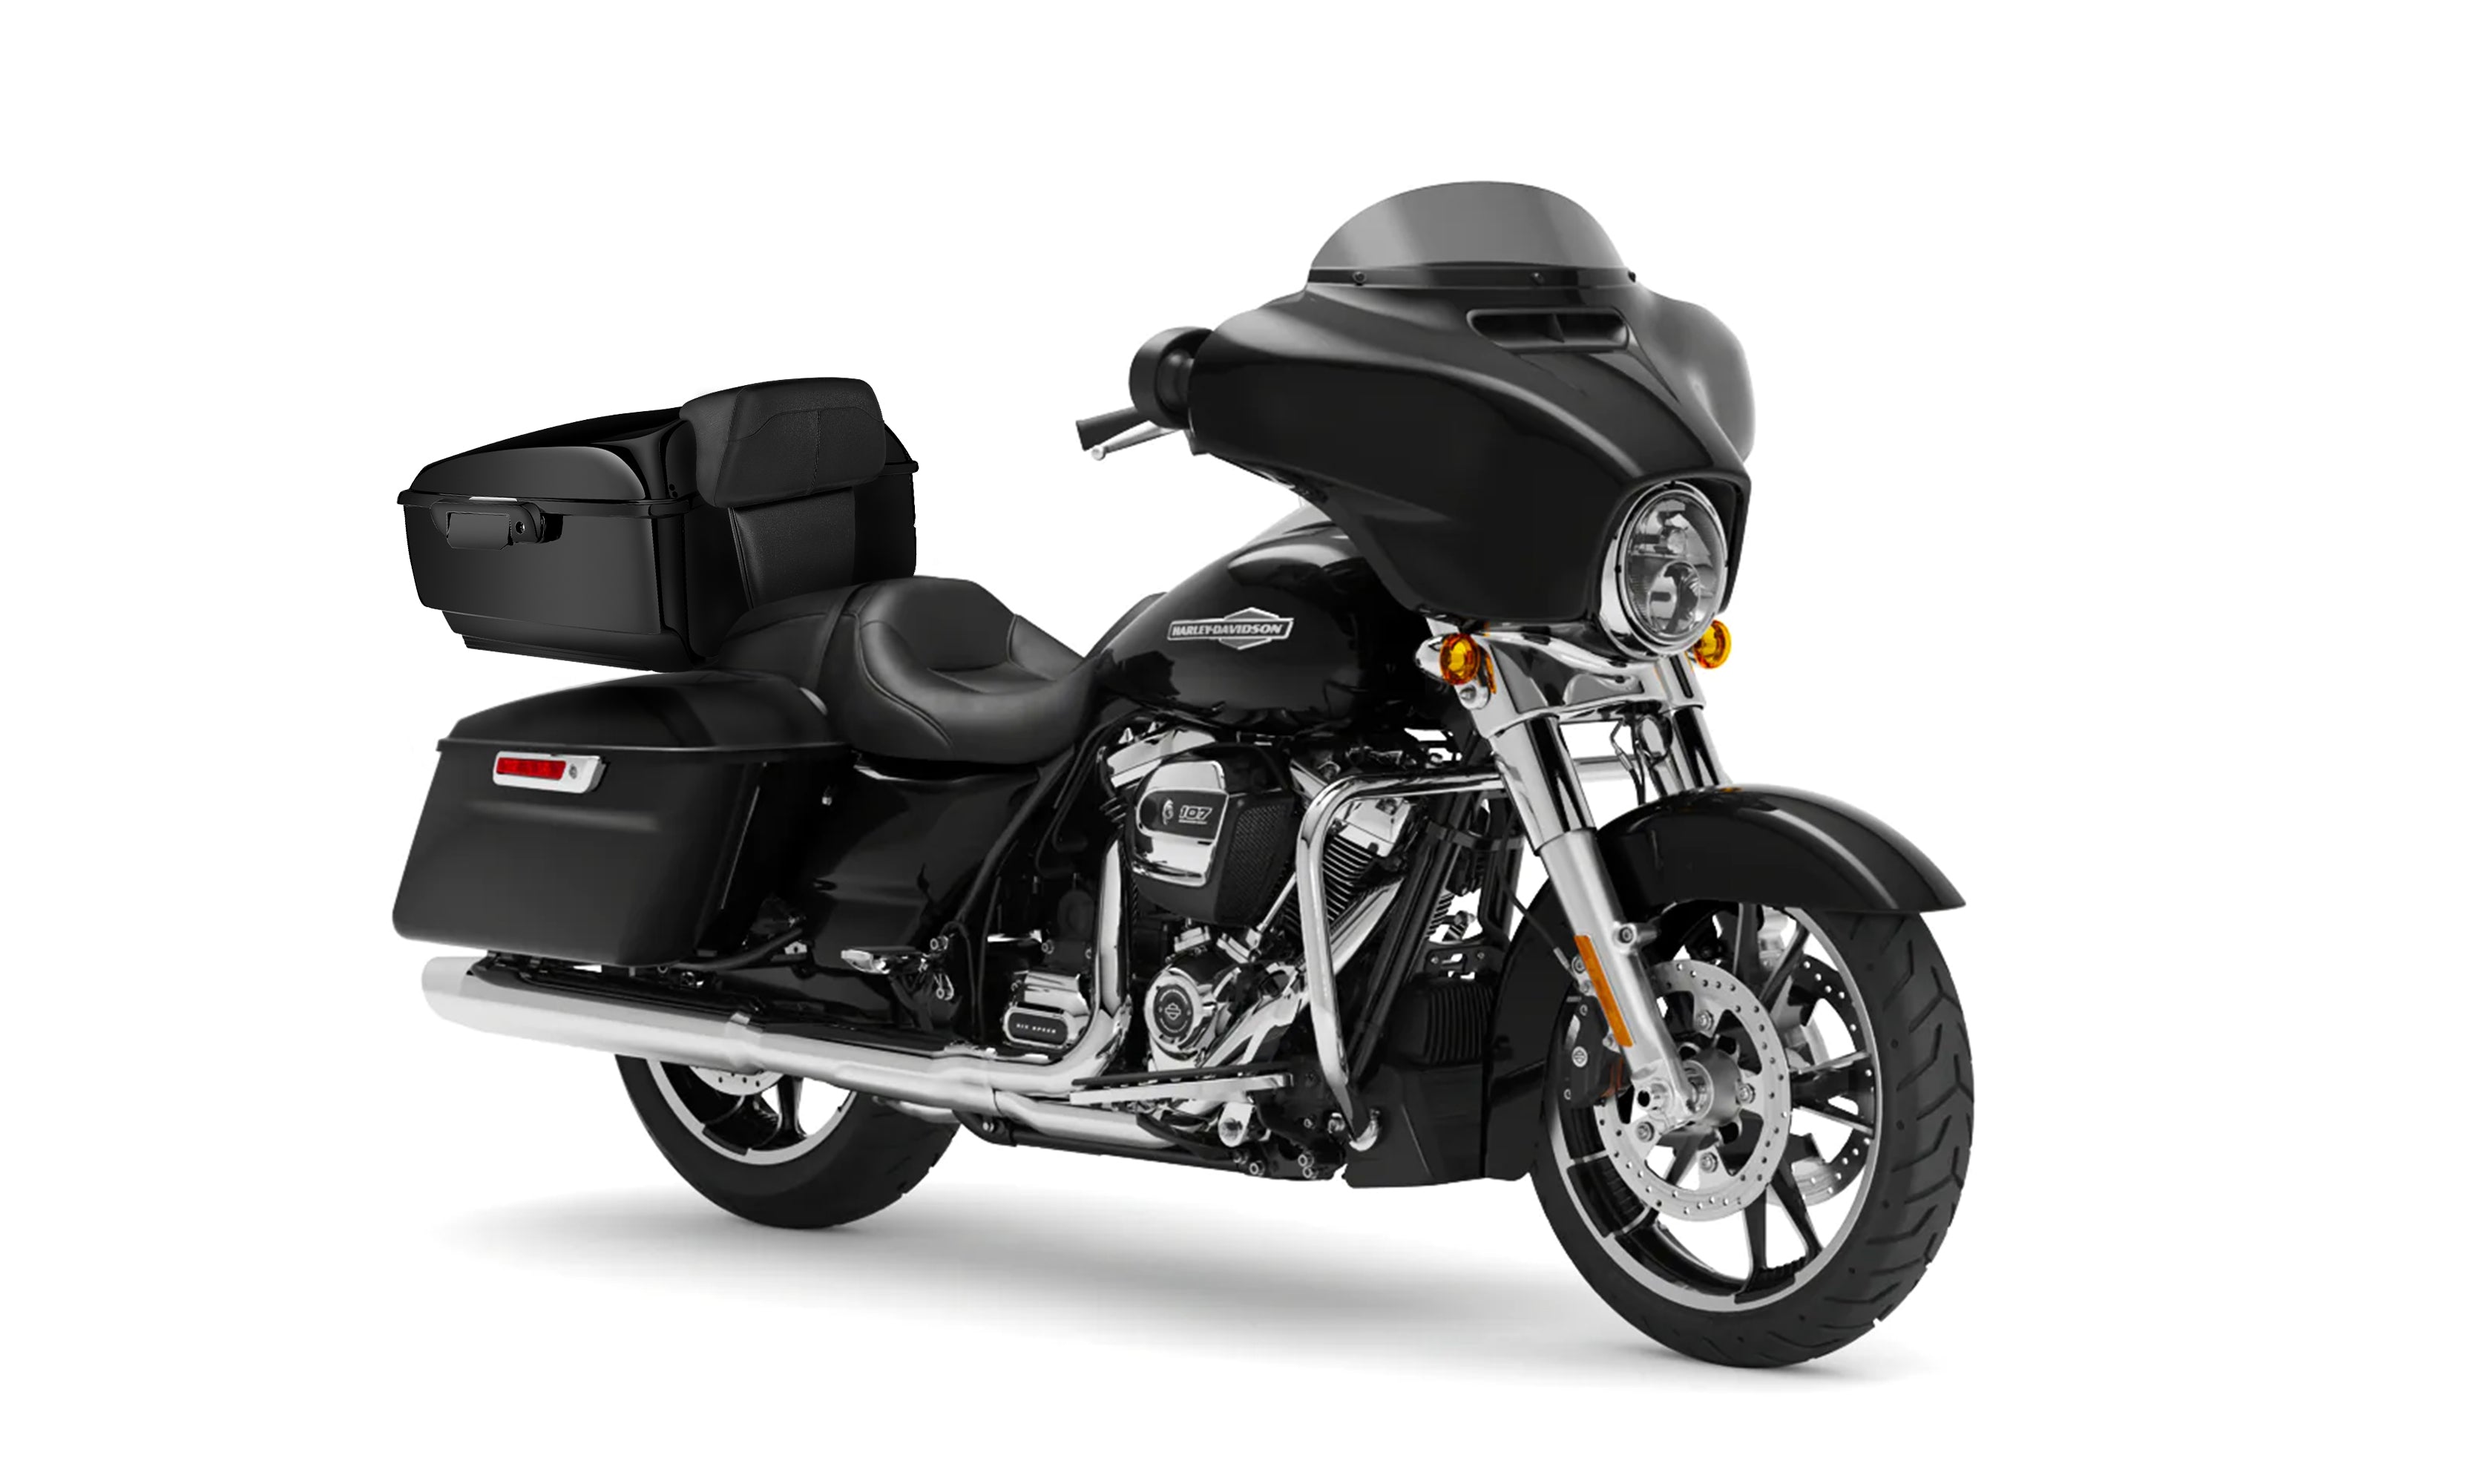 Viking Voyage Tour Pack Back Rest Pad For Harley Touring Electra Glide Bag on Bike View @expand